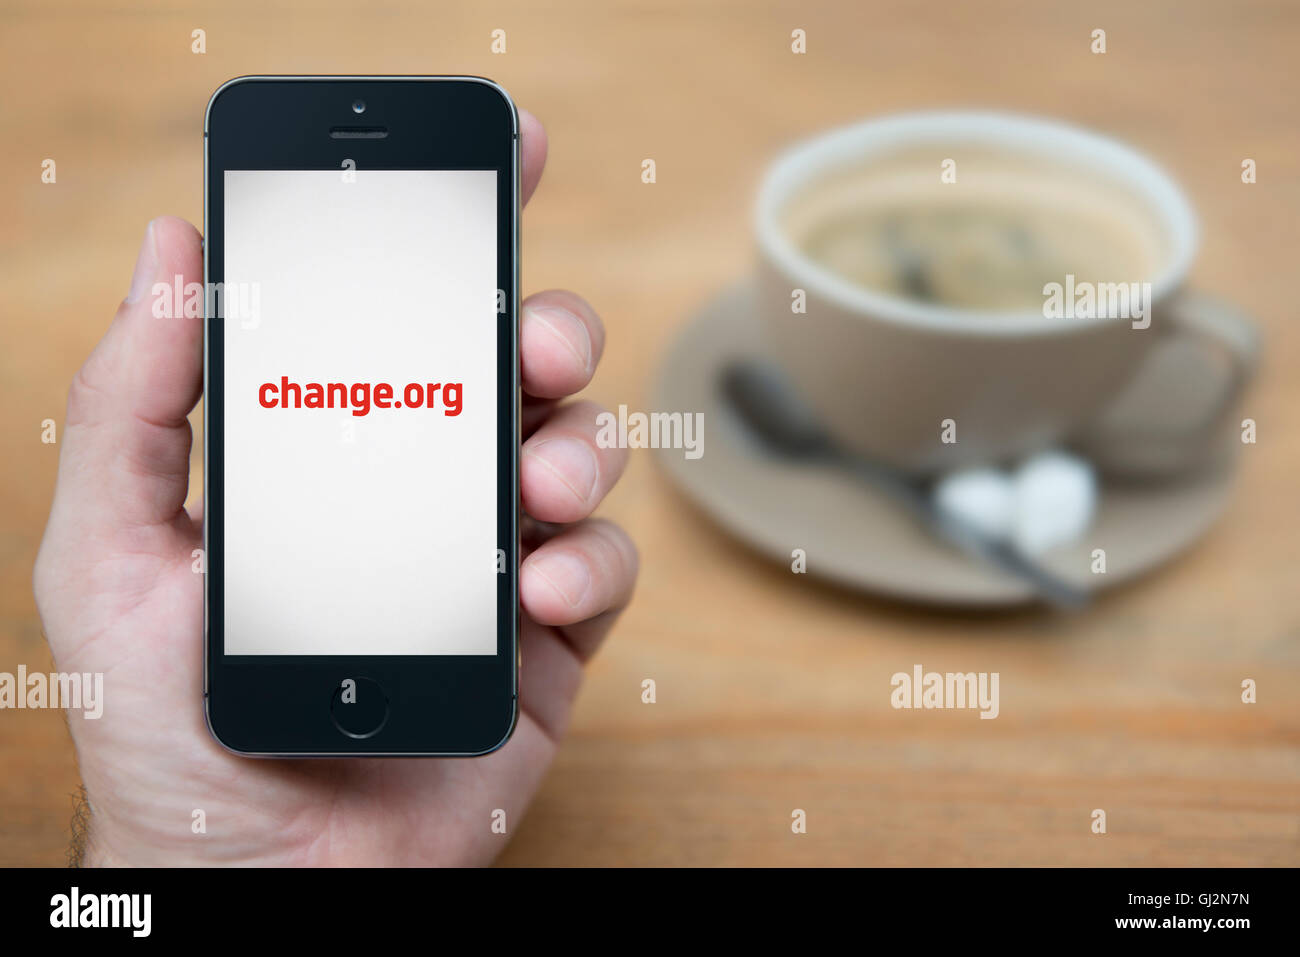 A man looks at his iPhone which displays the Change.org logo, while sat with a cup of coffee (Editorial use only). Stock Photo